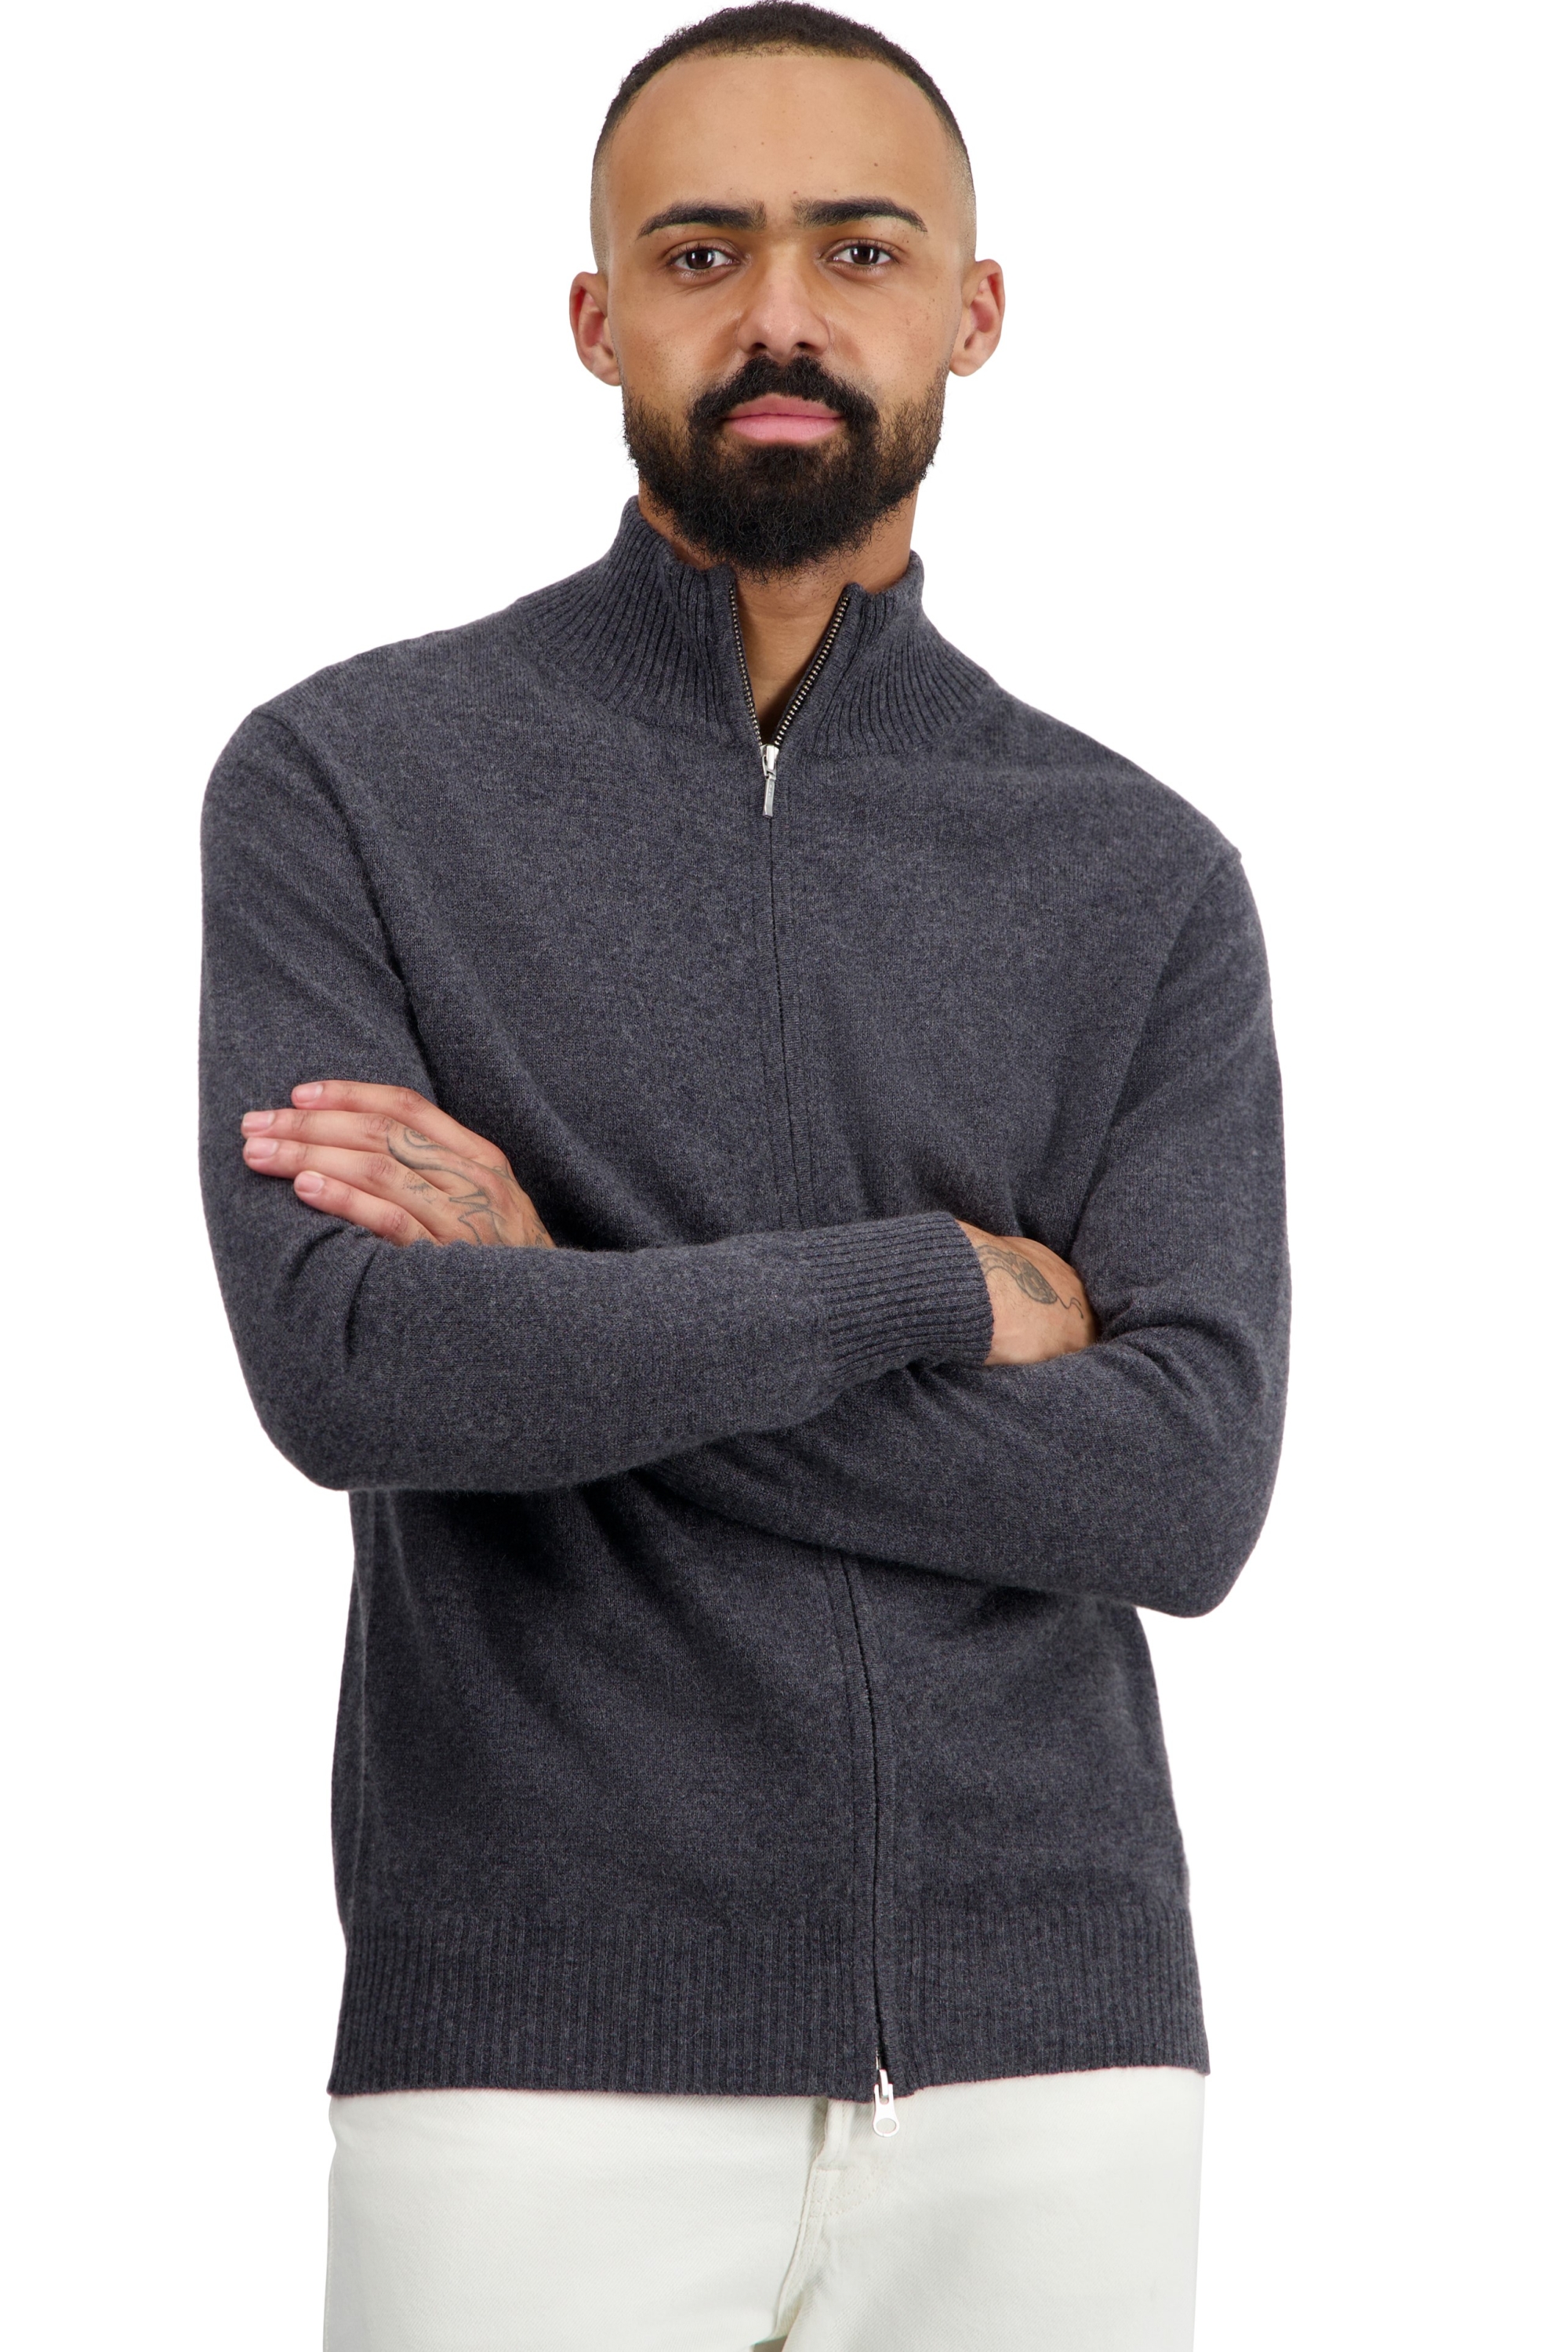 Cashmere men basic sweaters at low prices thobias first grey melange l